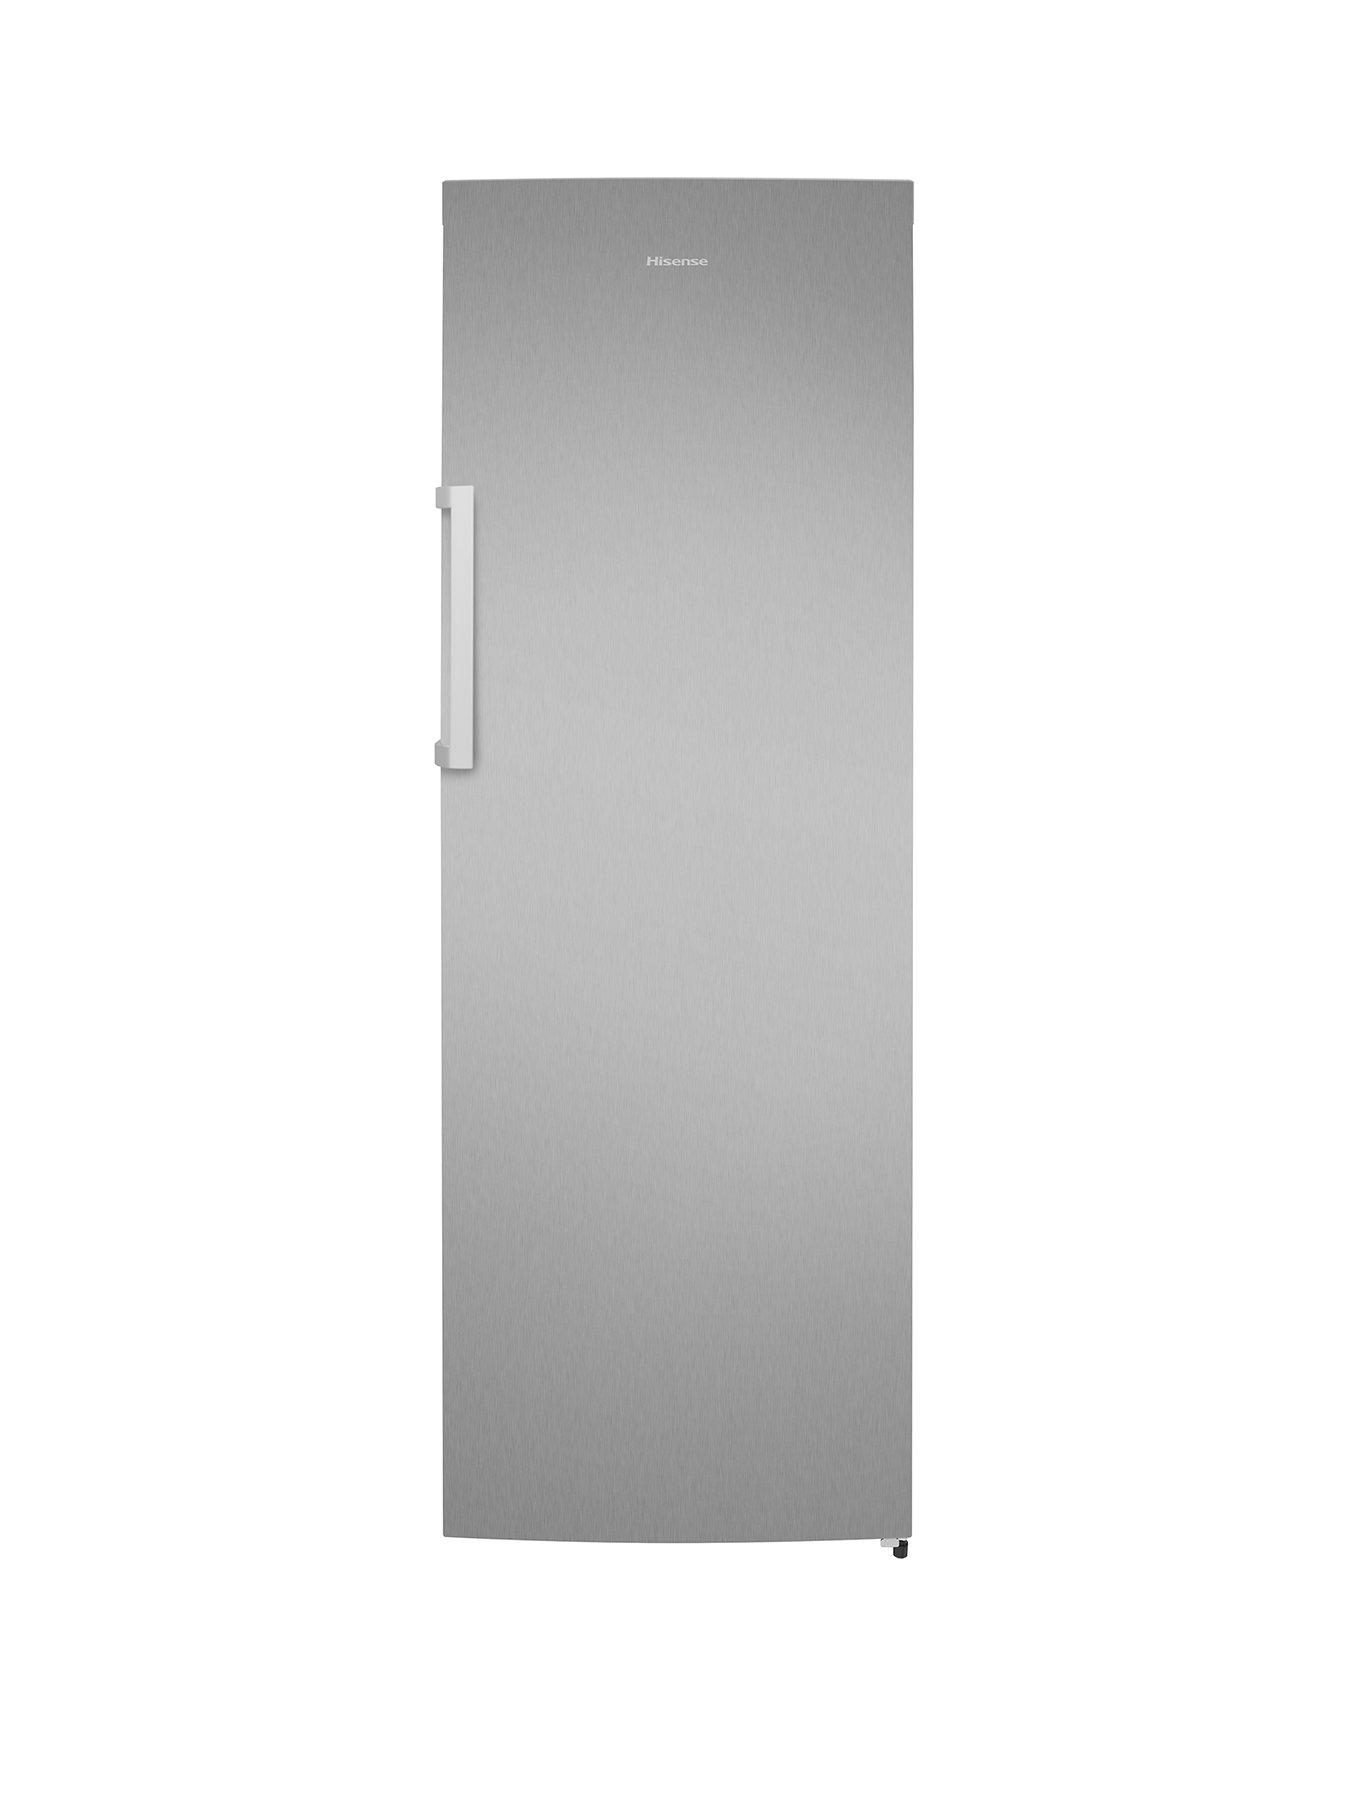 Hisense Fv306N4Bc1 60Cm Wide Frost-Free Freezer – Stainless Steel Effect